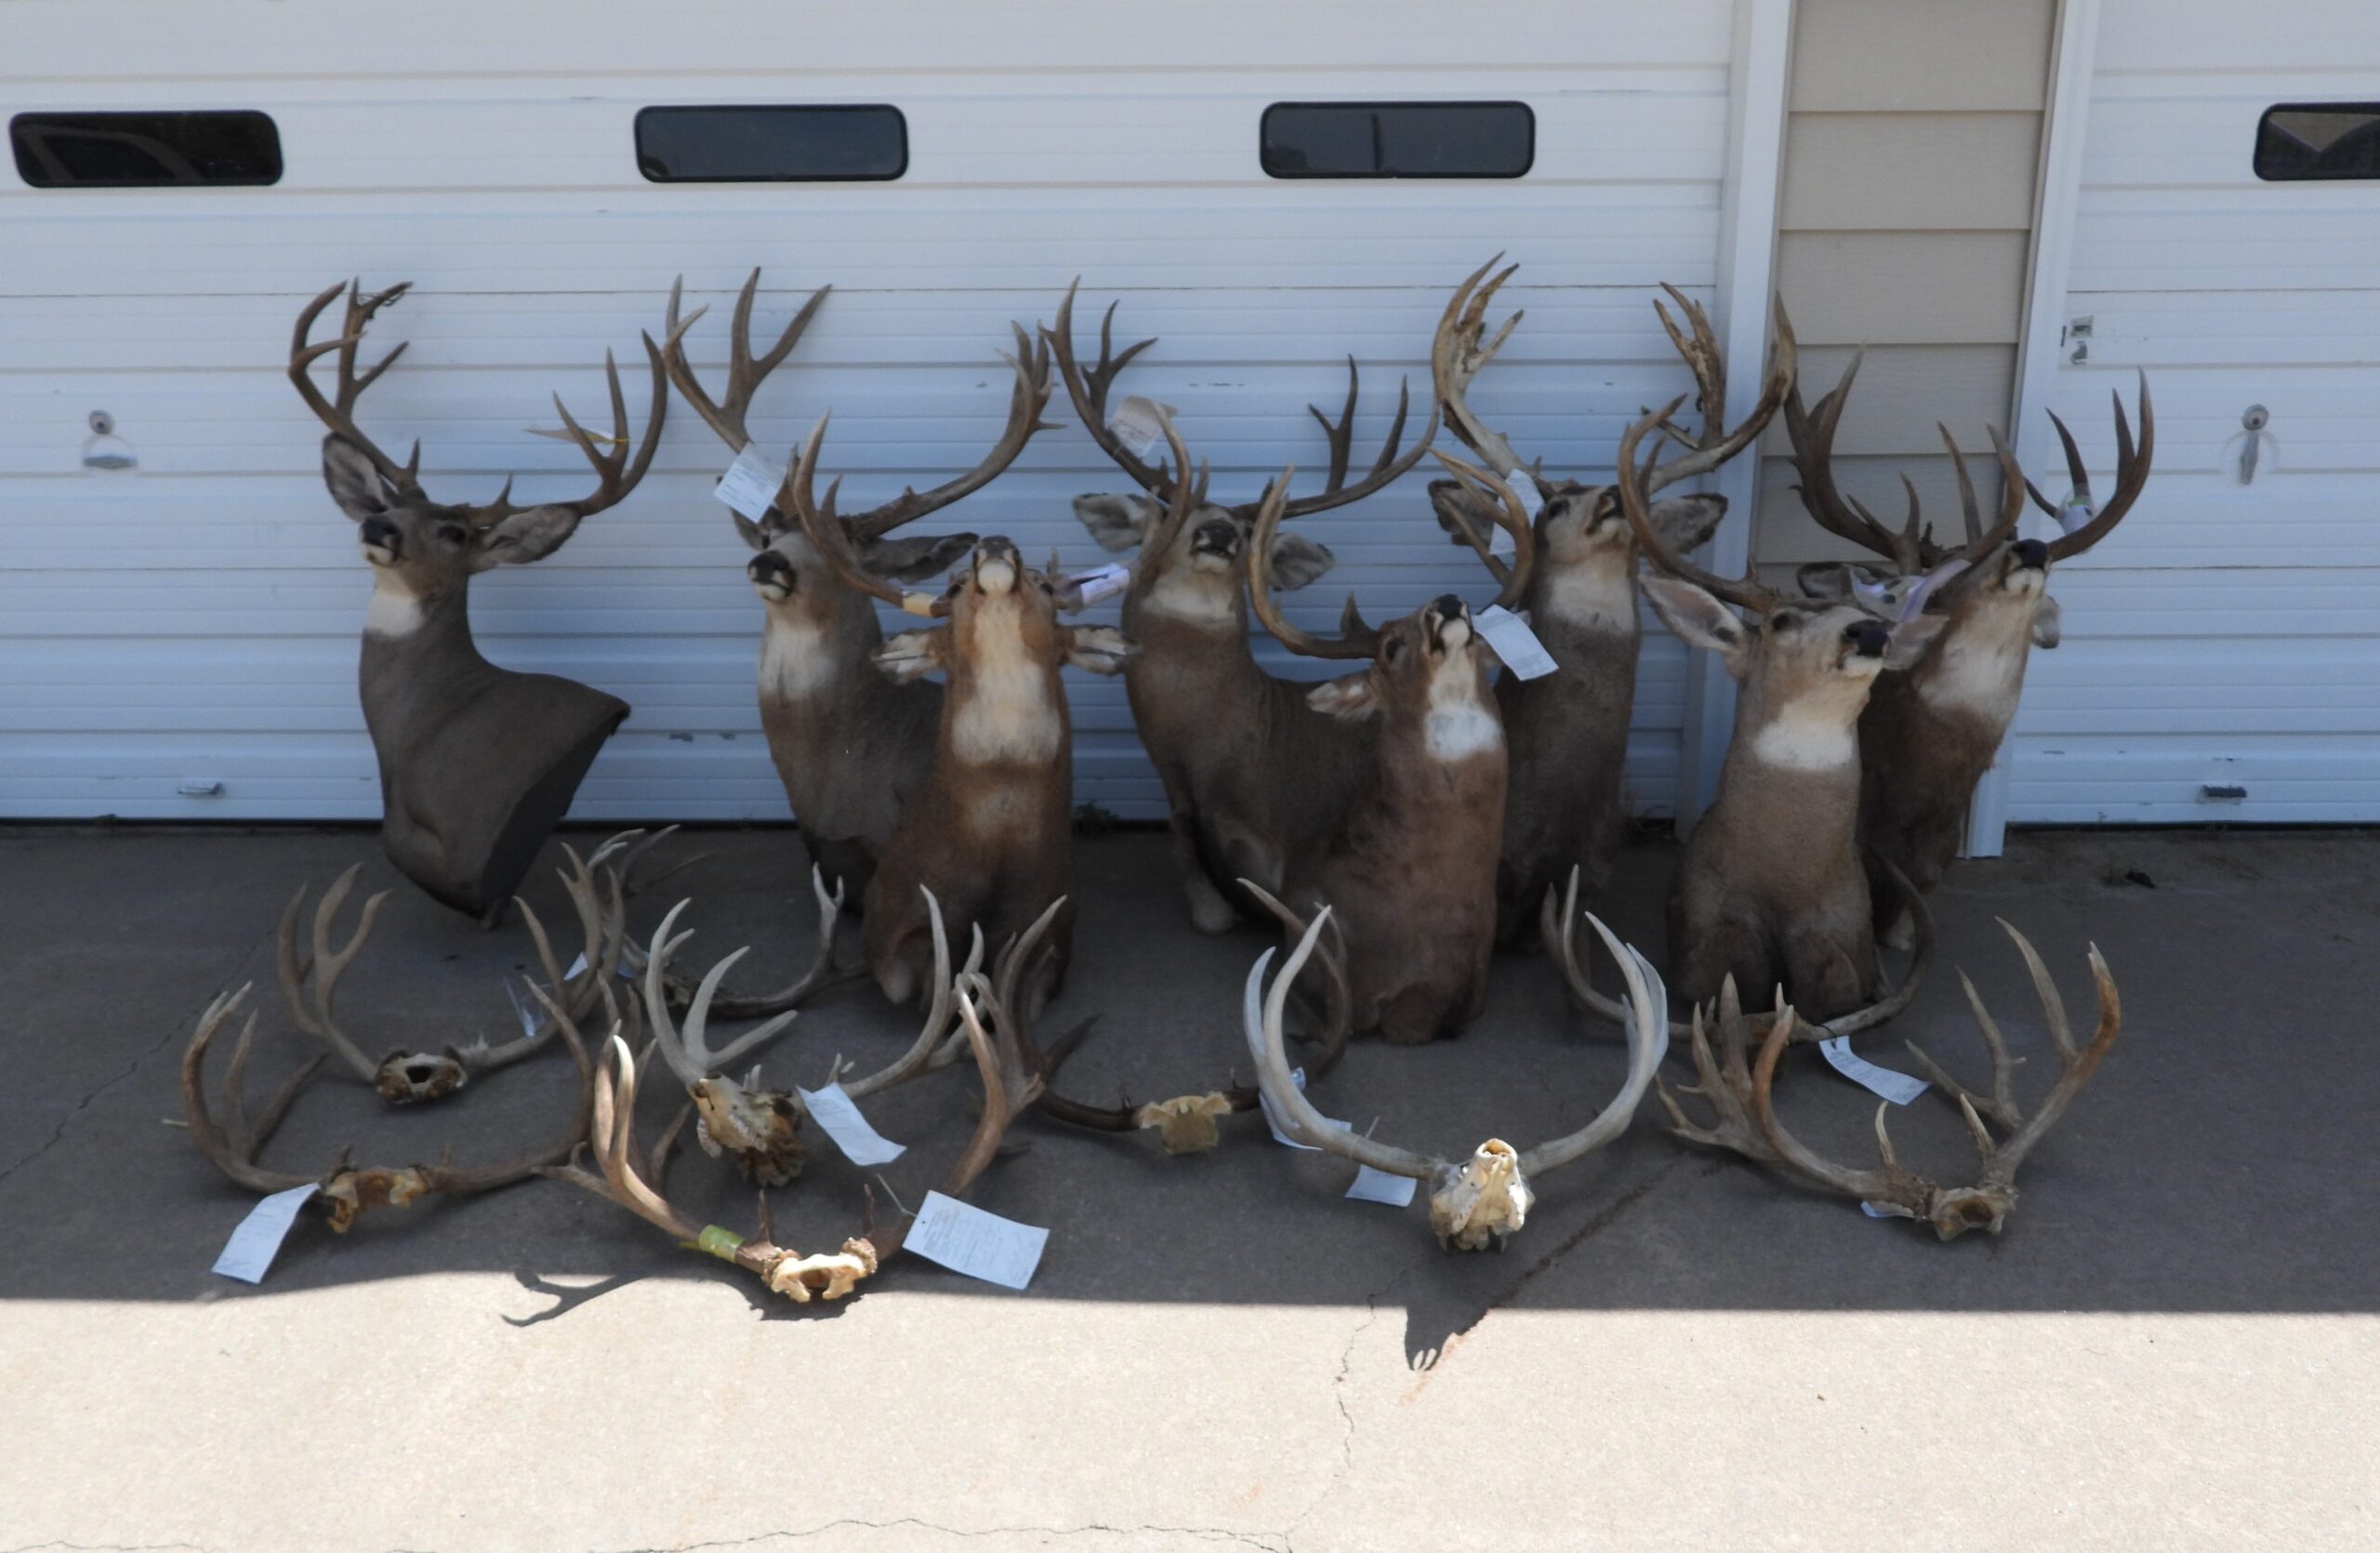 Kansas Poaching Investigation Ends in Charges Over Illegal Killing of Trophy Mule Deer, Turkeys, and Antelope